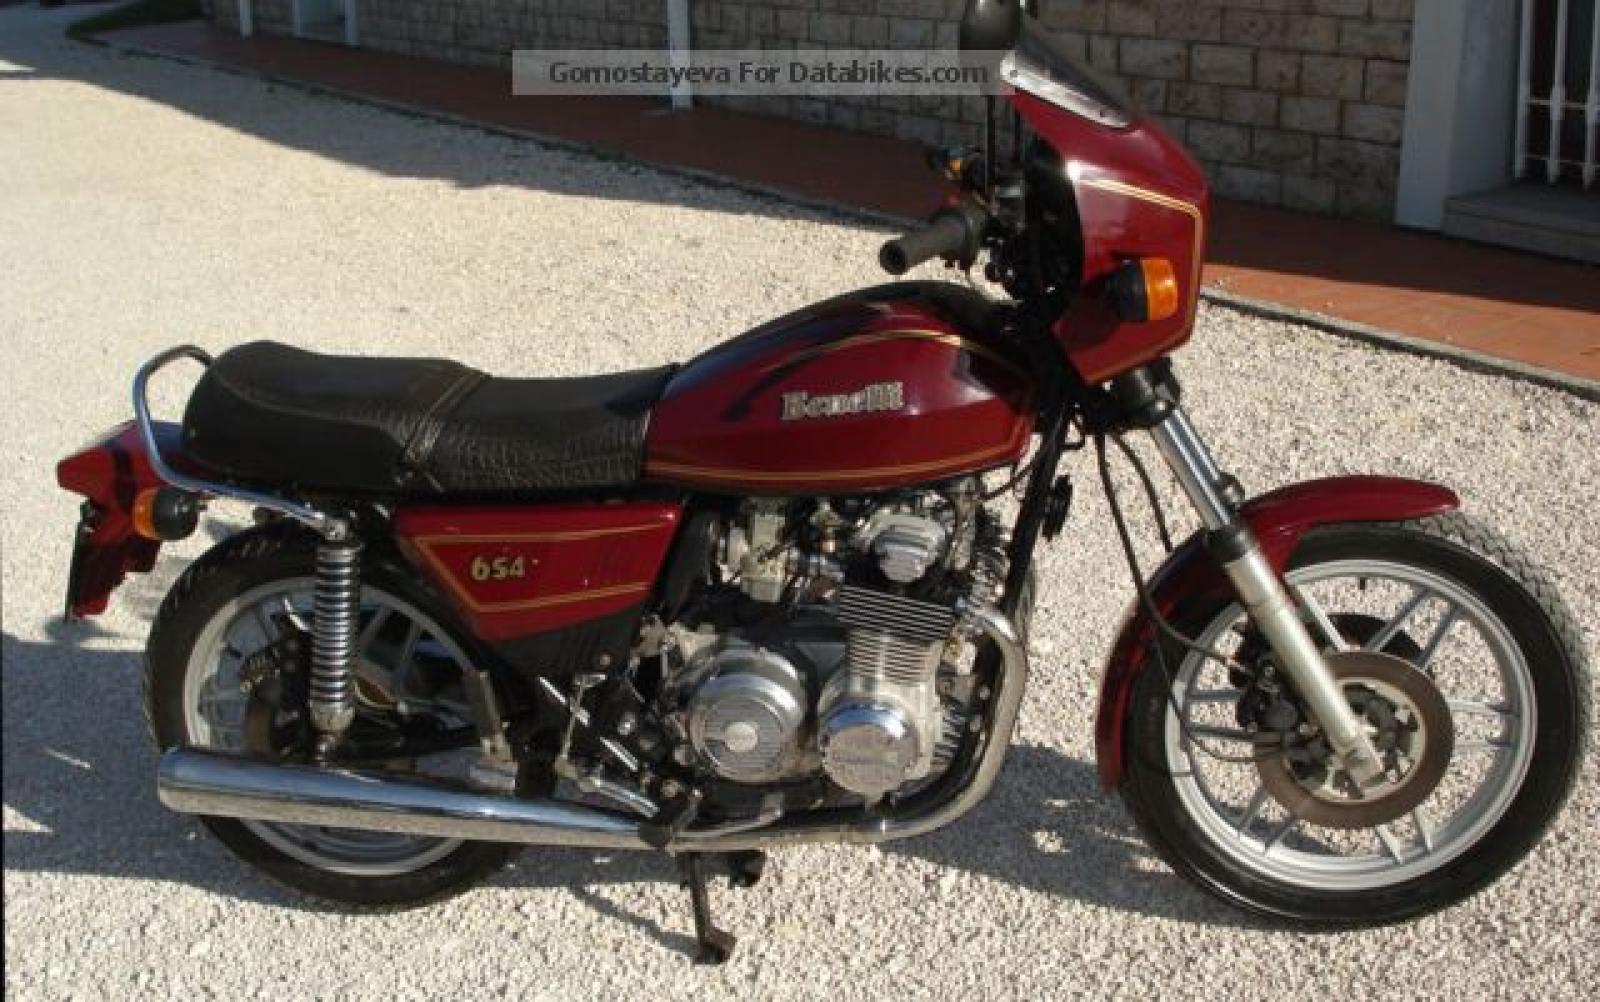 Review of Benelli 654 Sport 1984: pictures, live photos 